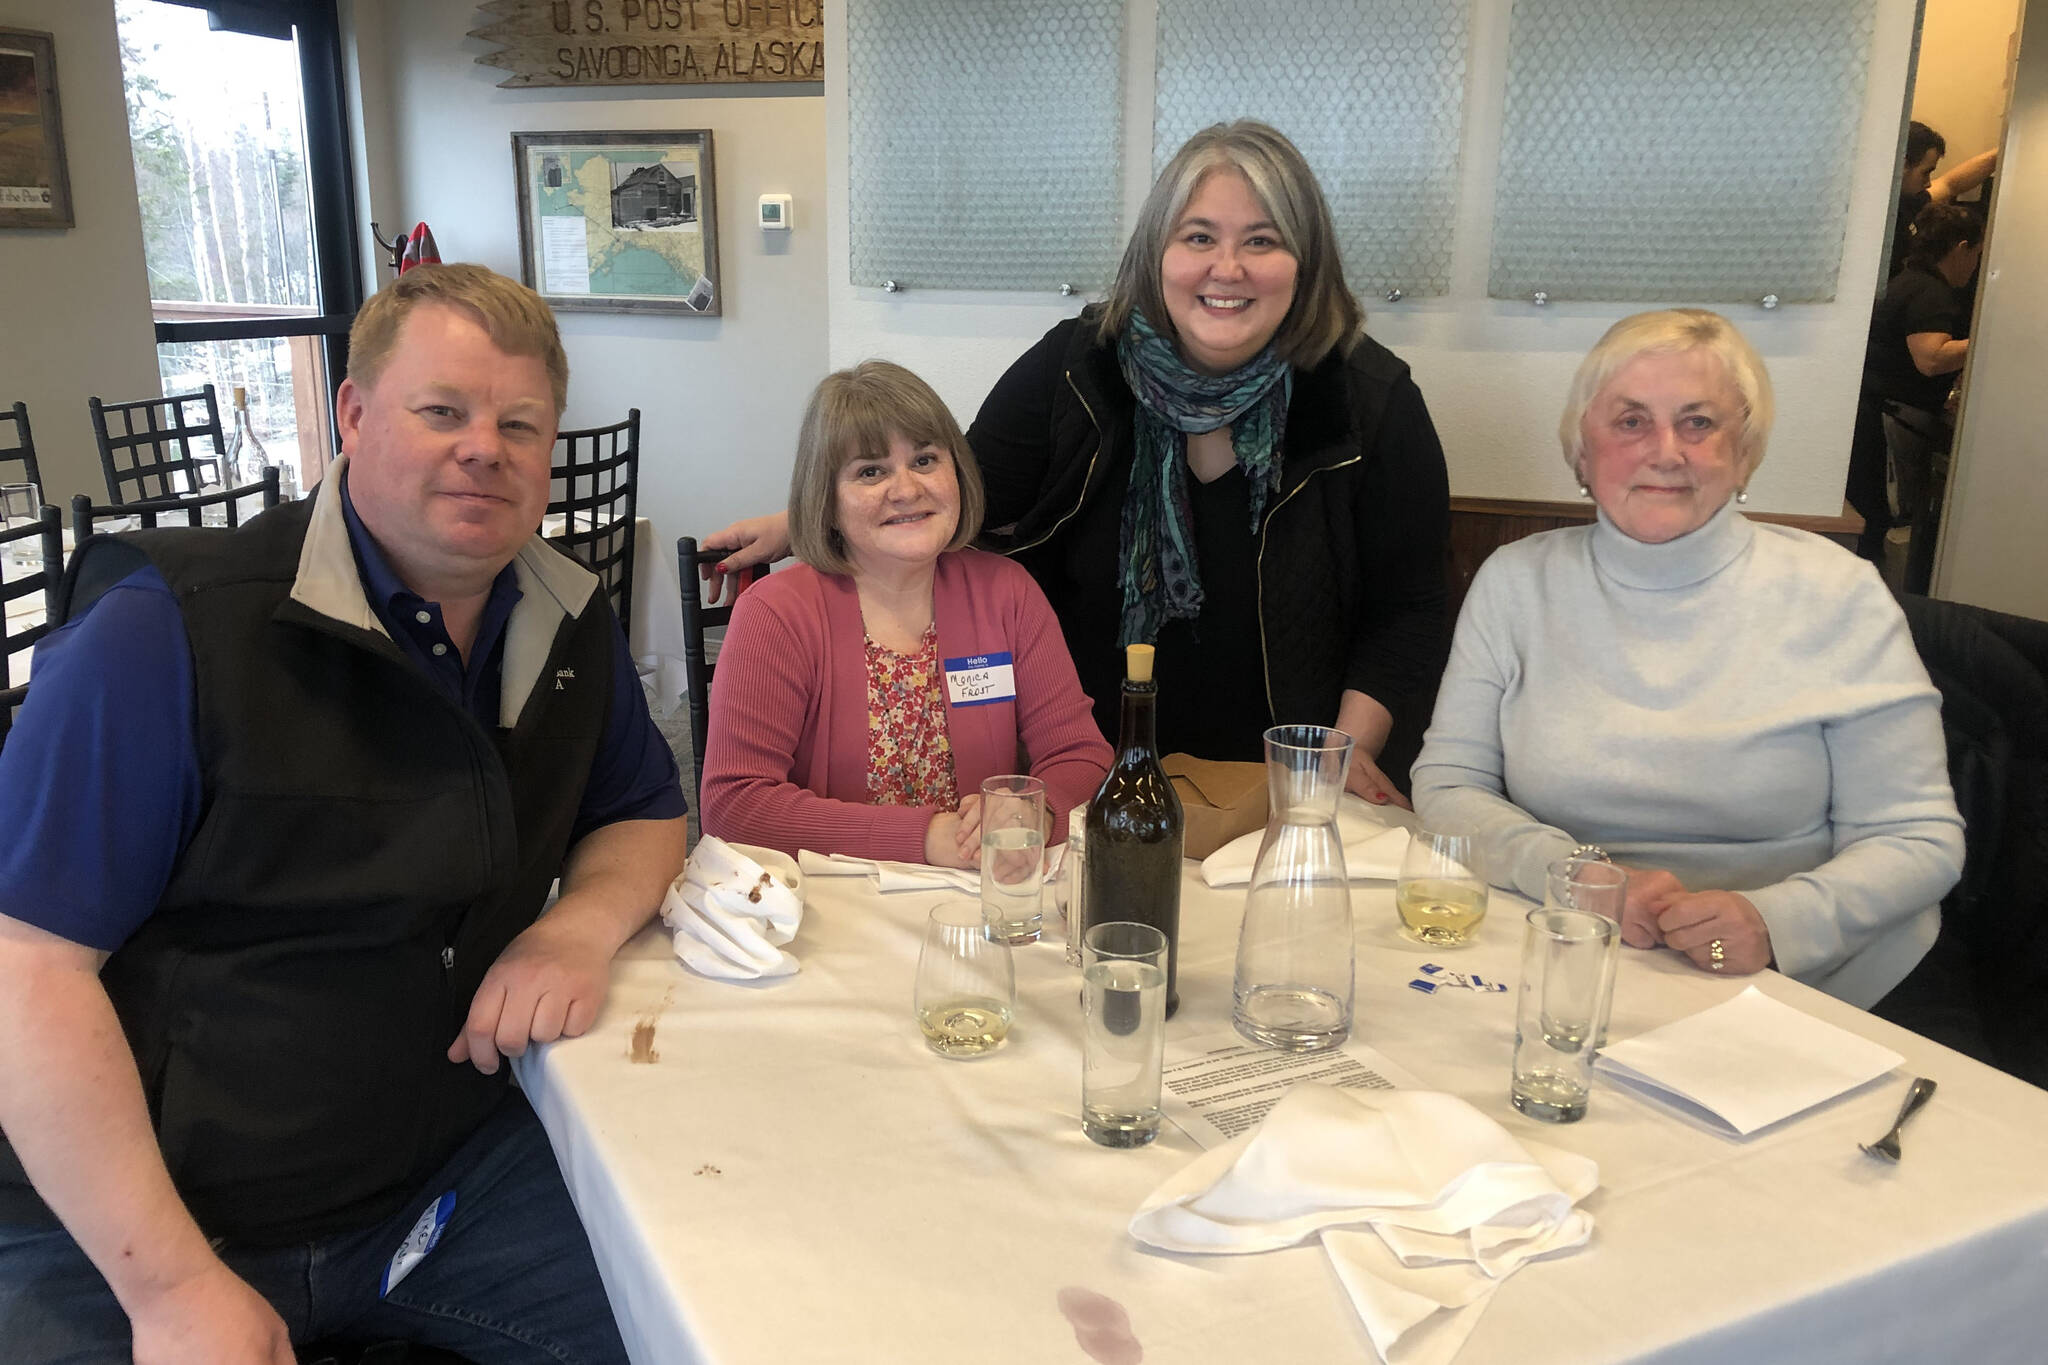 (From left) Mike Frost, Monica Frost, Tara Sweeney and Sue Carter attend a campaign meet and greet at Addie Camp on Saturday, April 16, 2022, in Soldotna, Alaska. Sweeney is running to fill the seat of former U.S. House Rep. Don Young, who died in March. (Photo courtesy Karina Waller)